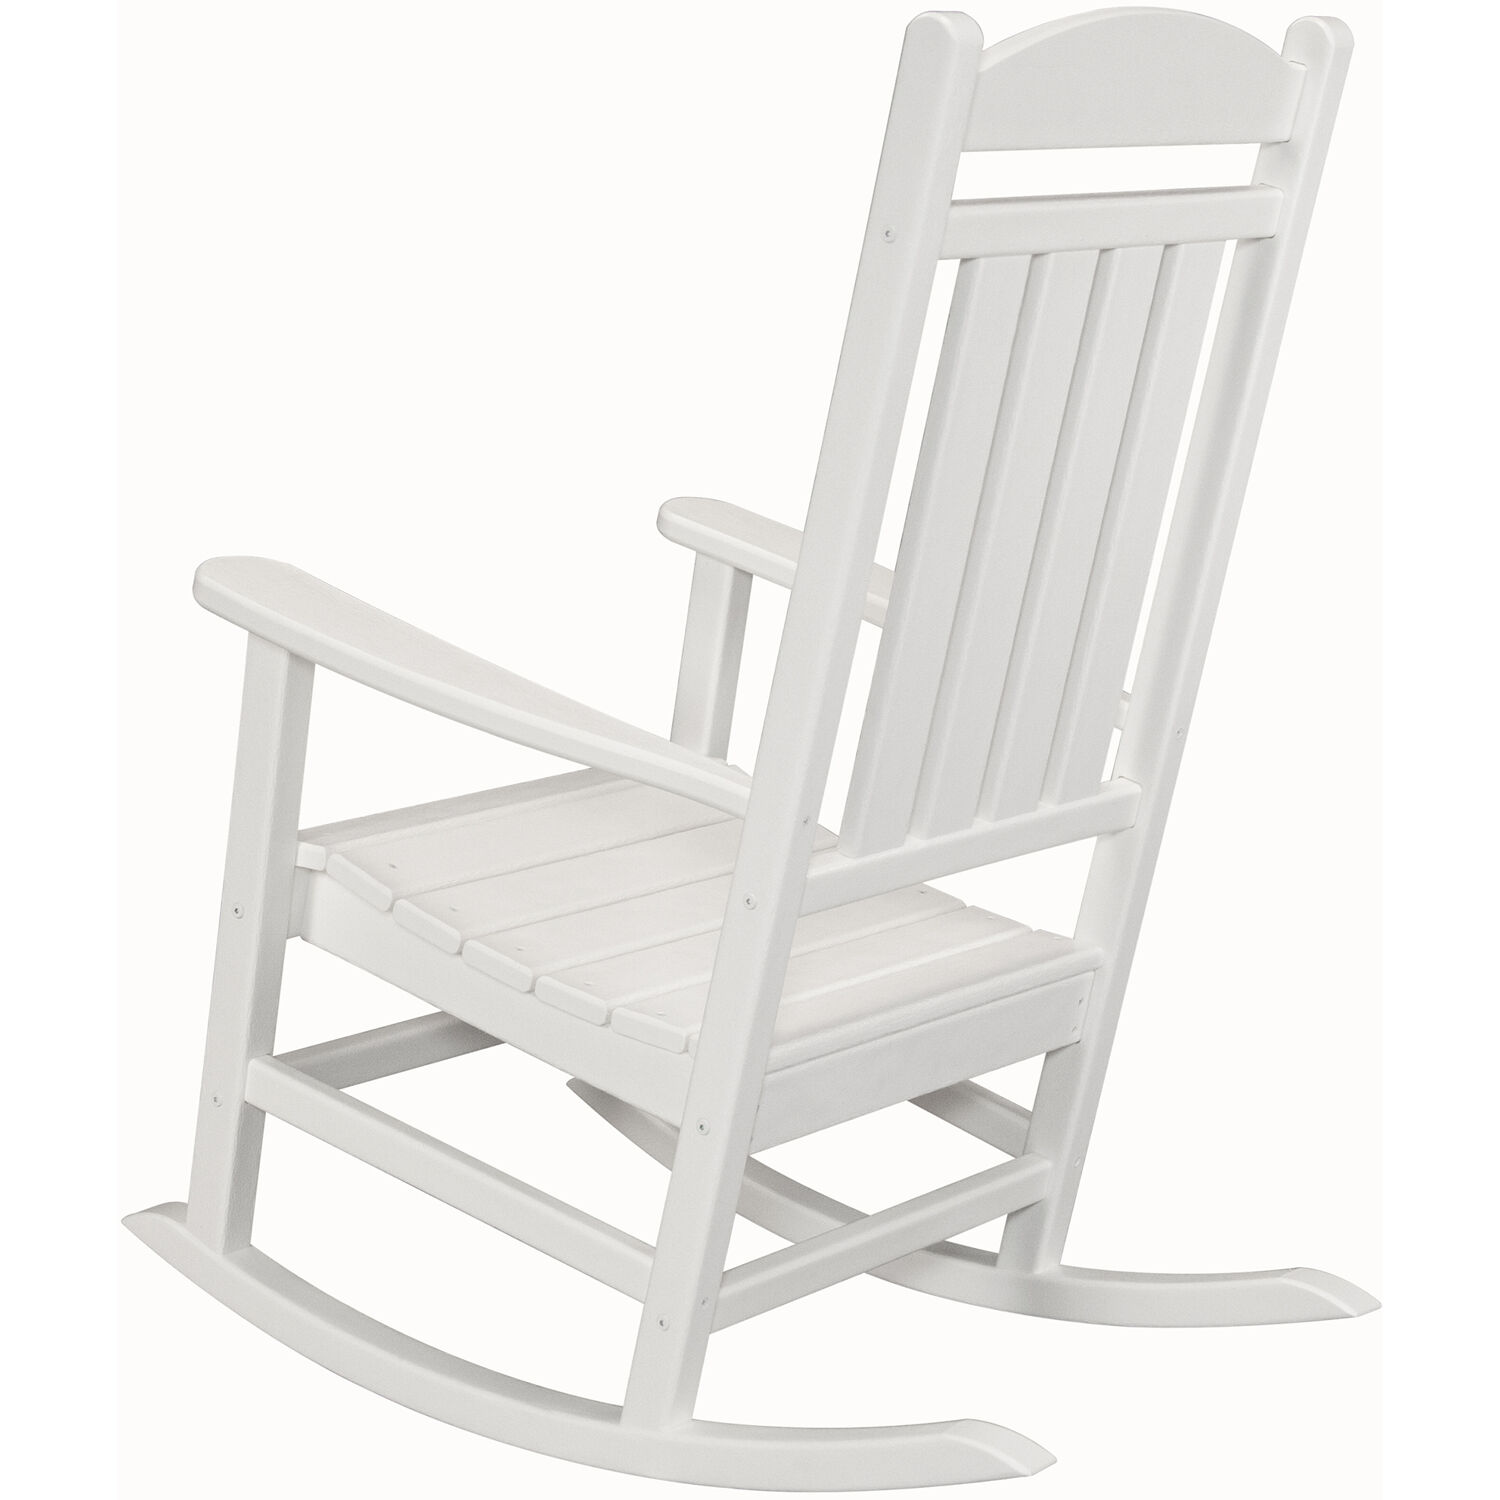 Hanover Pineapple Cay All-Weather 3-Piece Outdoor Patio Porch Rocker Chat Set, 2 Rockers and Side Table, Eco-Friendly, Recycled Material, Made in USA - PINE3PC-WHT - image 5 of 5